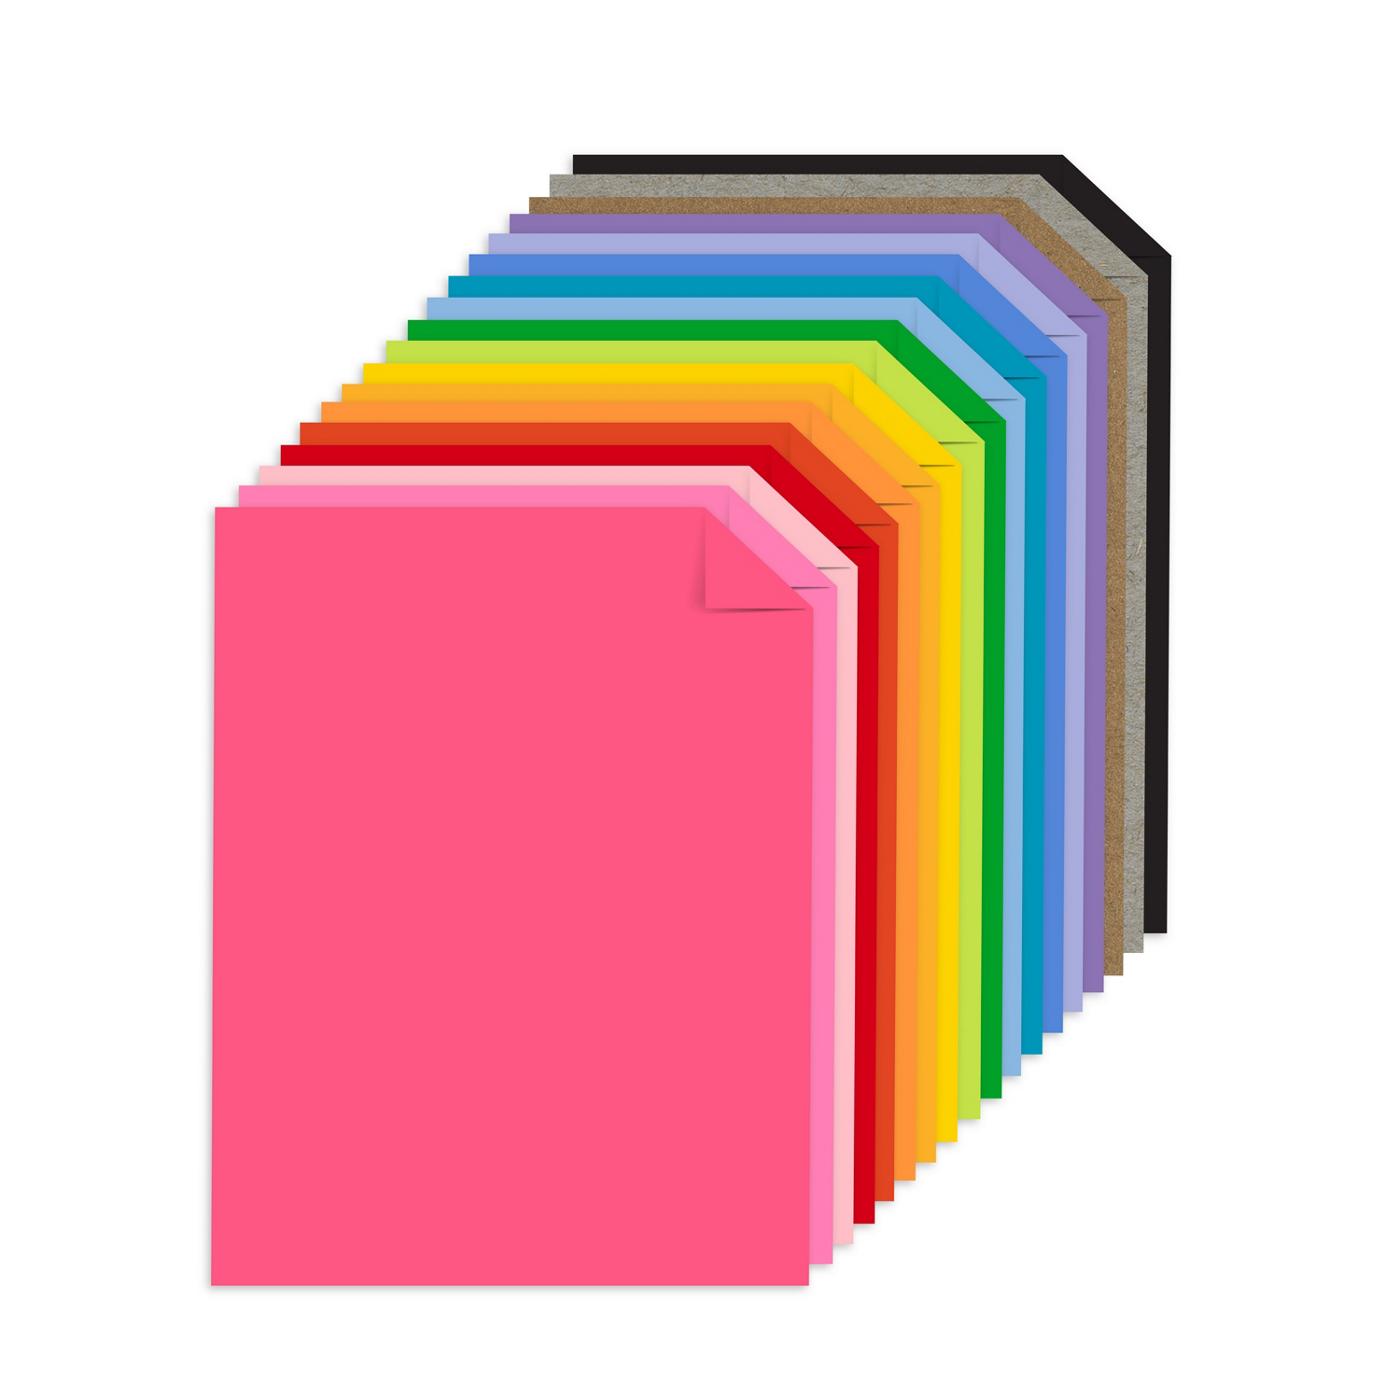 Astrodesigns Cardstock Paper - Multi Color, 72 Ct; image 2 of 2